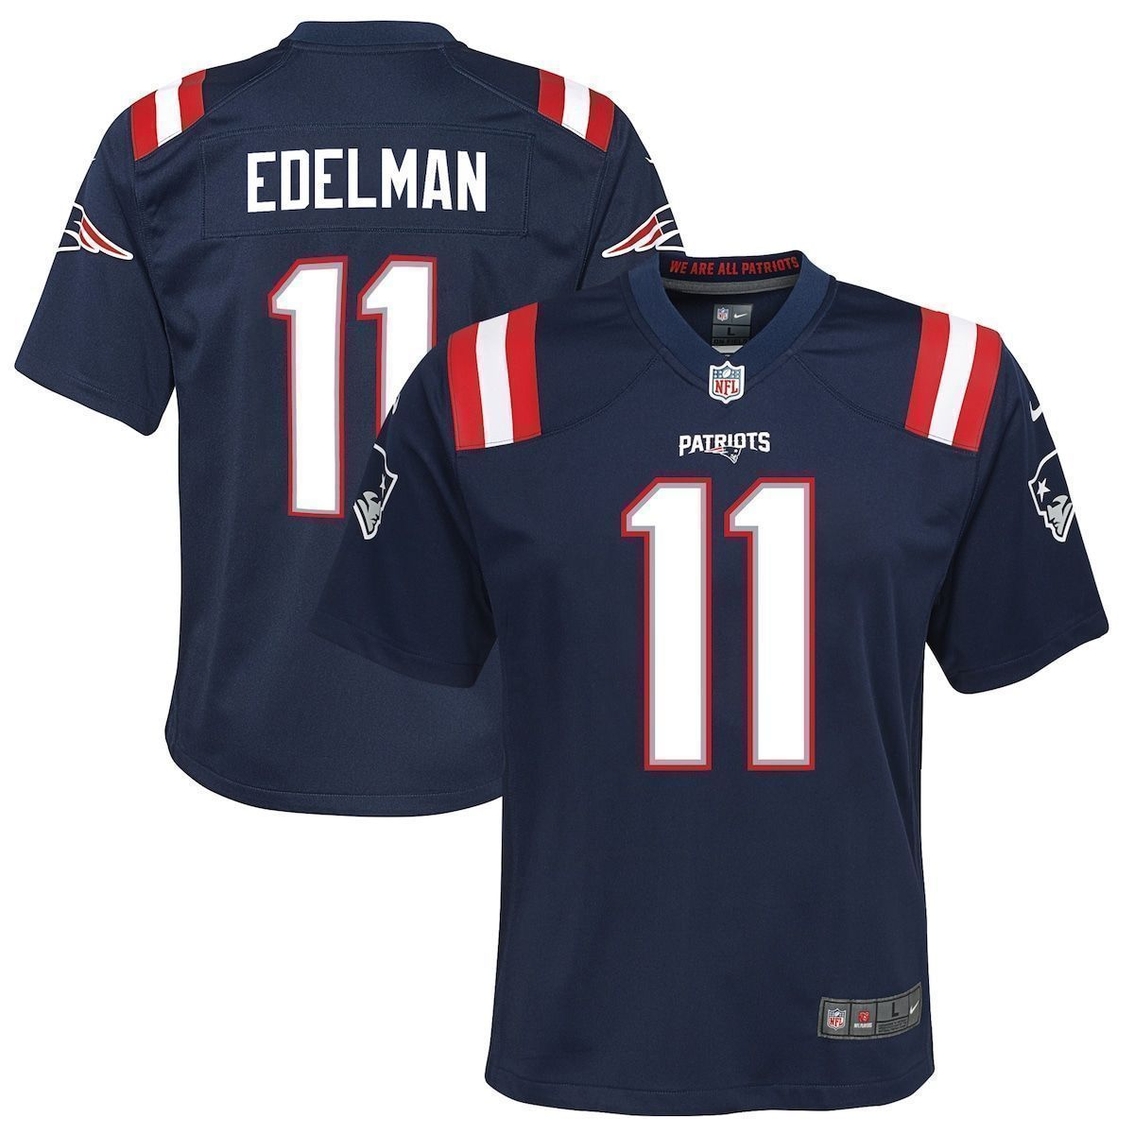 Nike Youth Julian Edelman Navy New England Patriots Game Jersey - Image 2 of 4